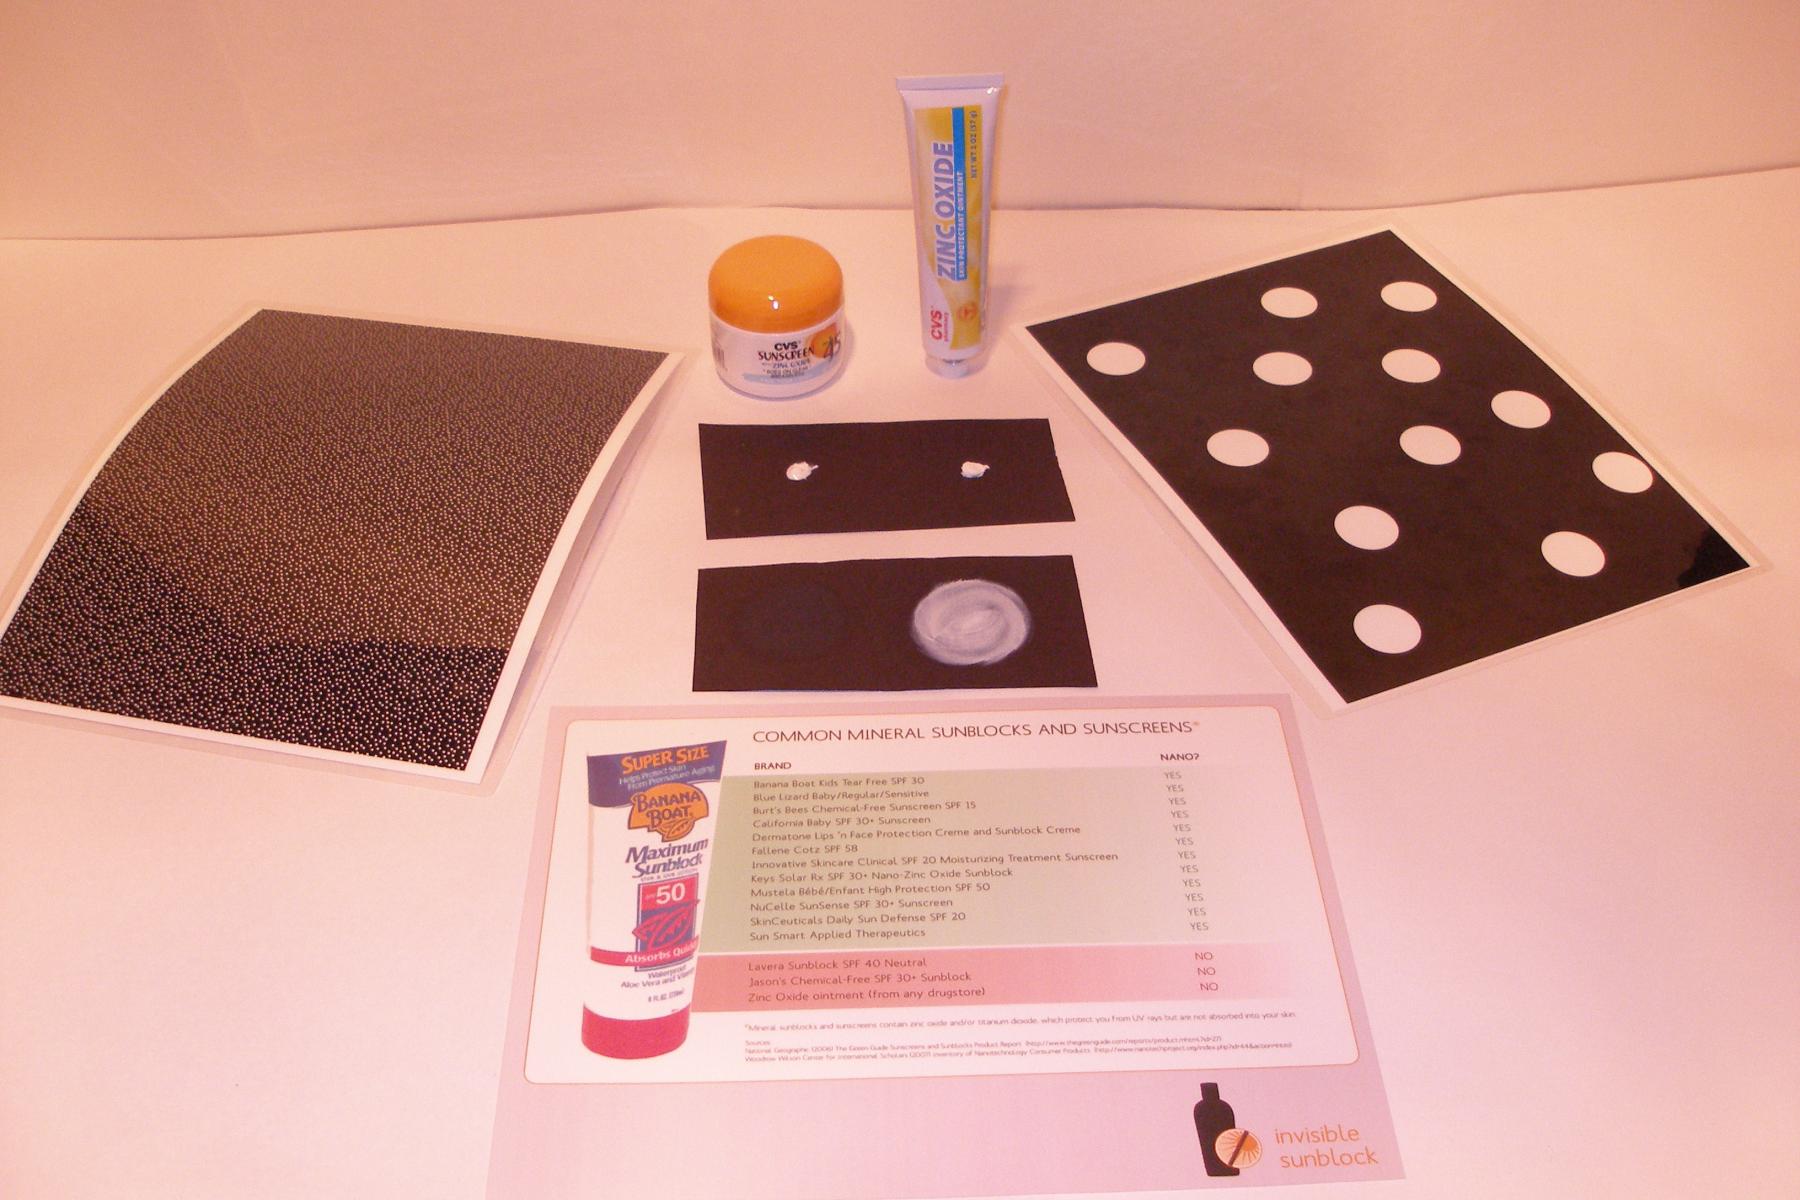 Components in NanoDays sunblock activity including sunscreen and black paper.